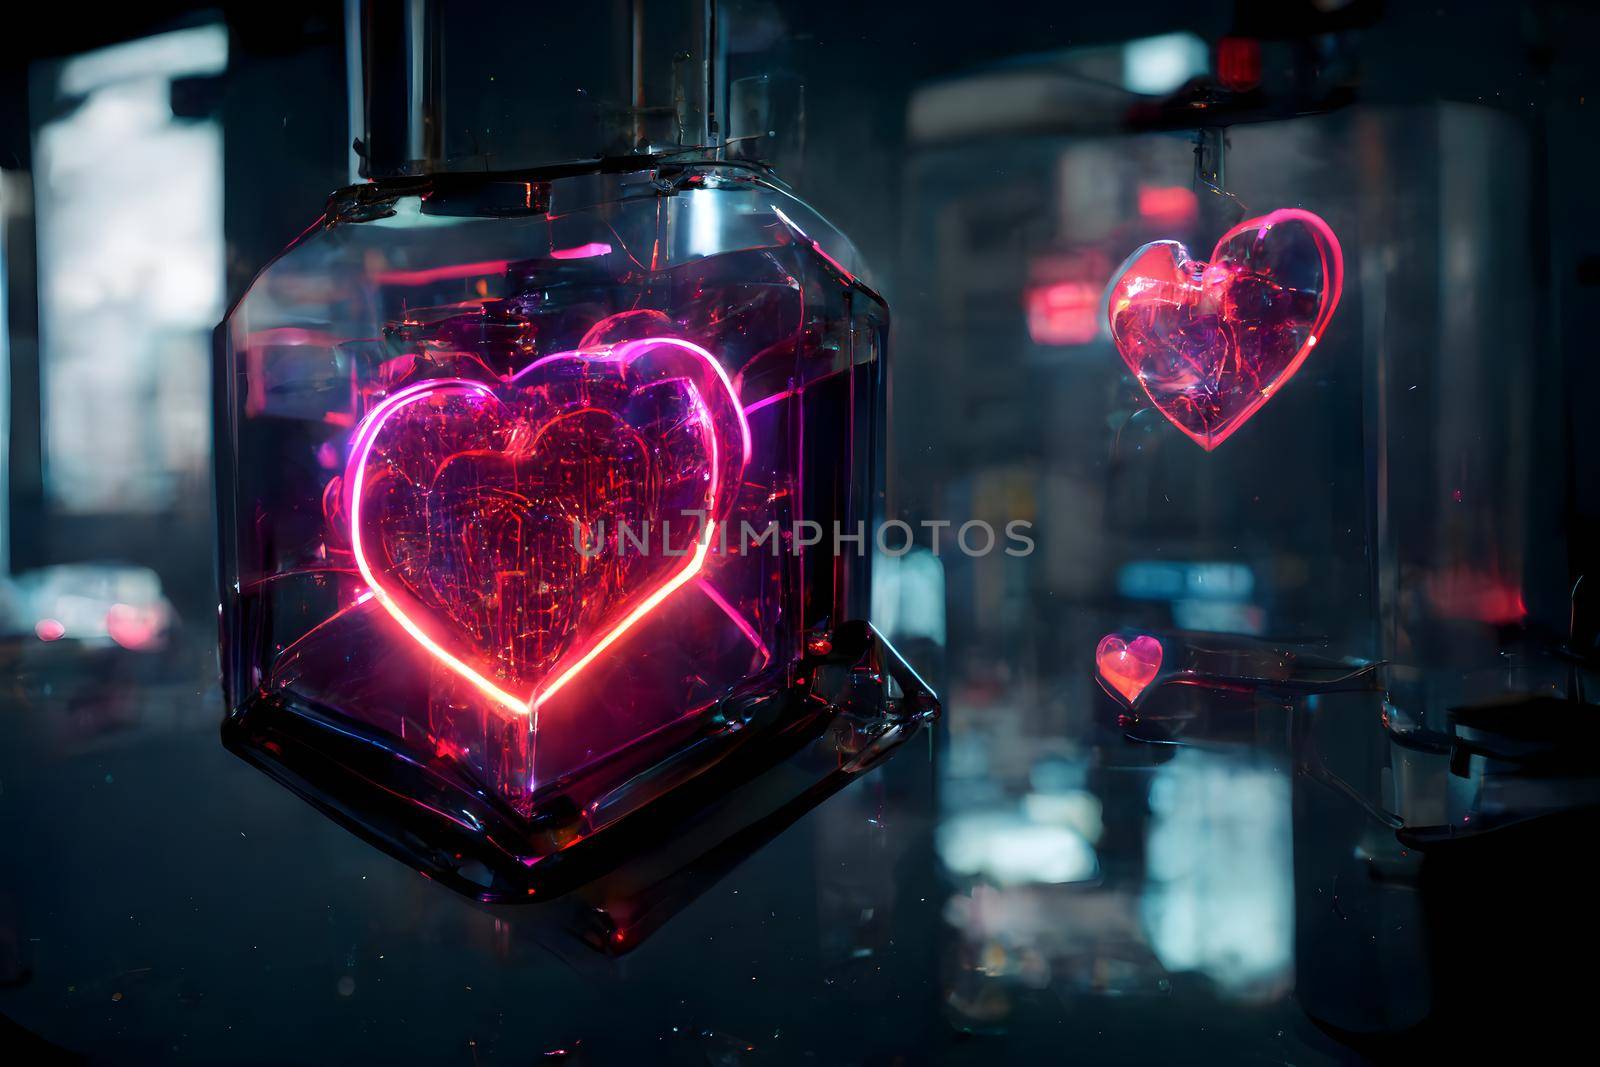 cyberpunk neon high-tech heart in night city environment, neural network generated art for valentines day. Digitally generated painting-like image. Not based on any actual scene or pattern.